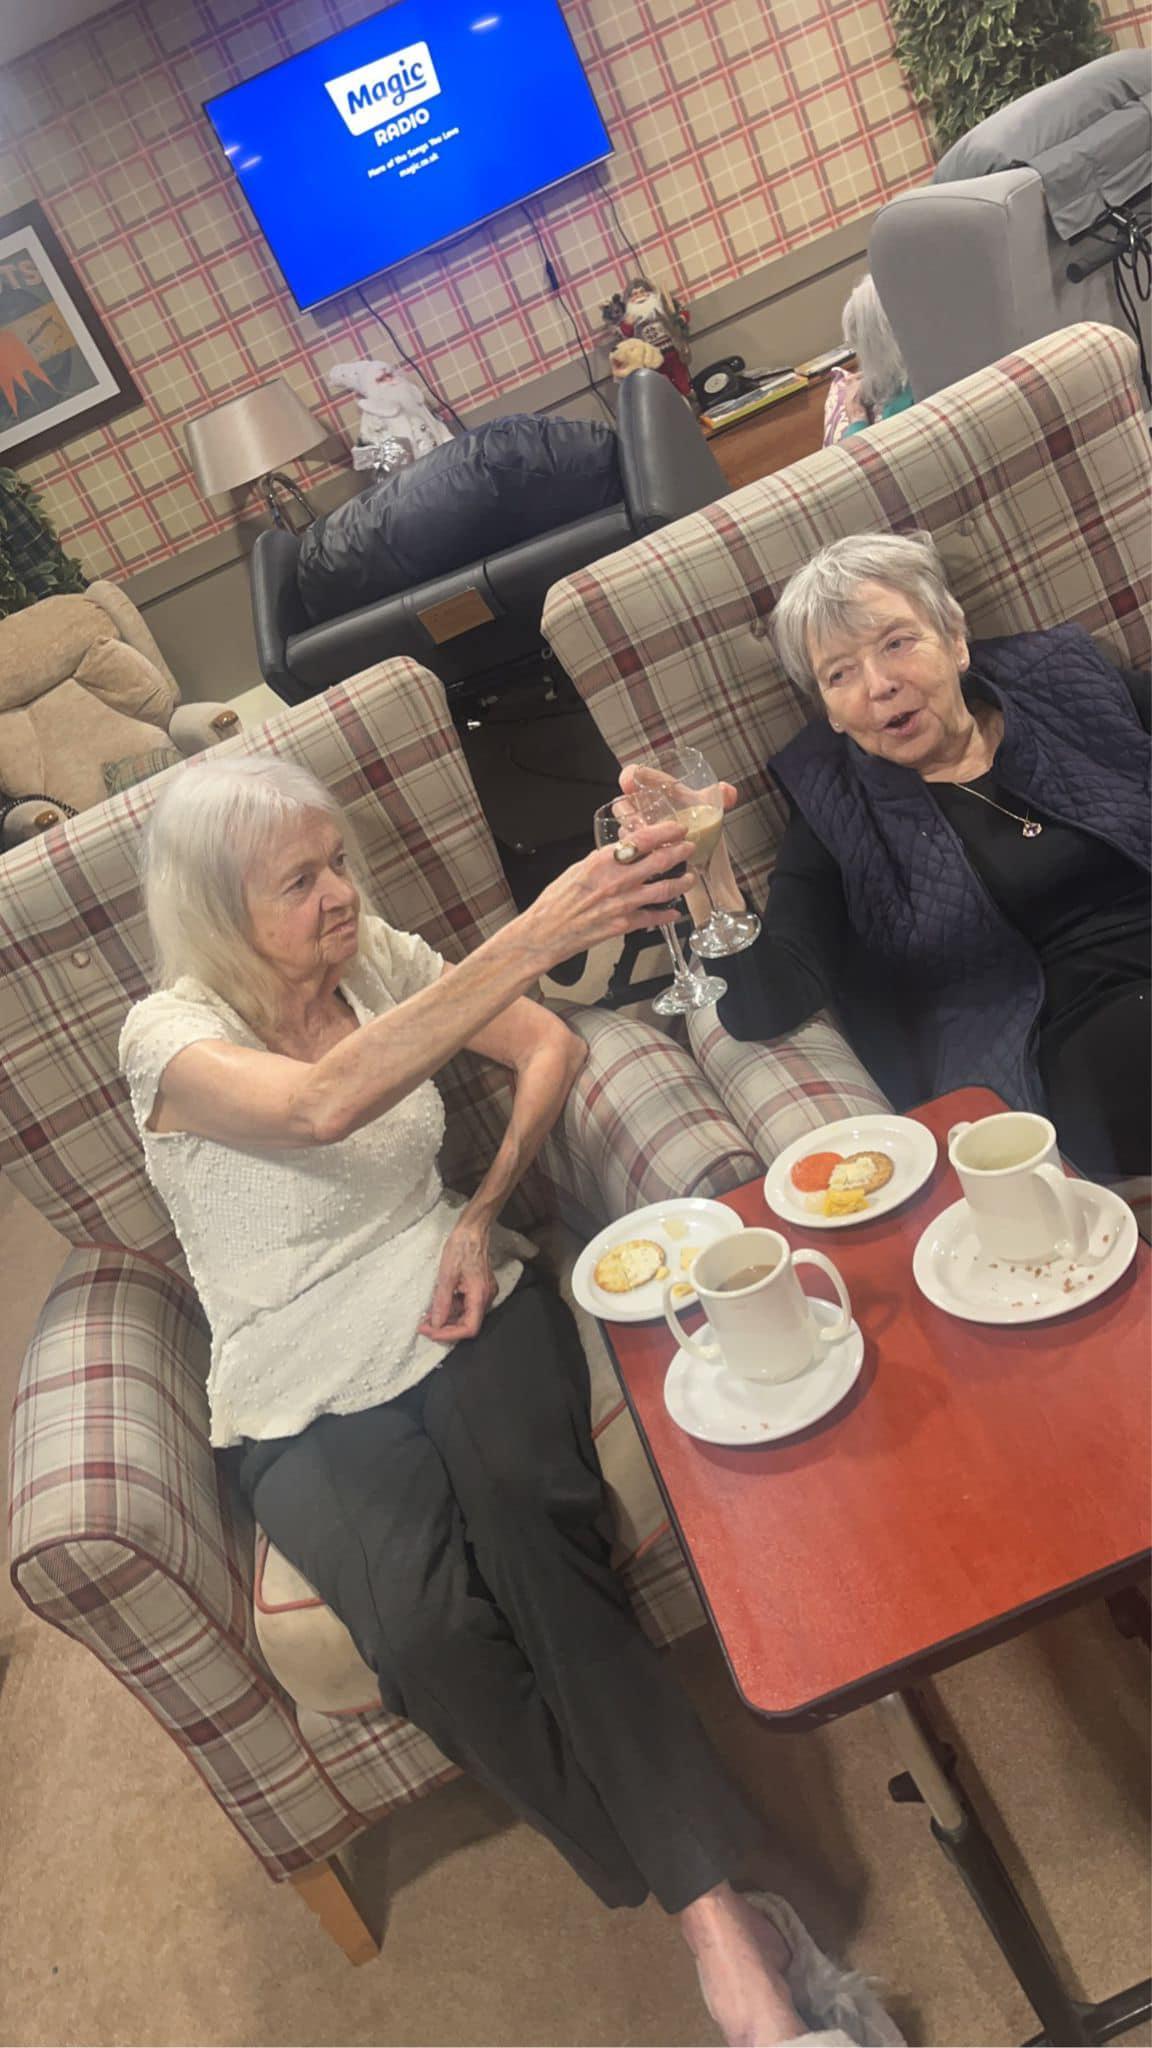 residents cheer-sing their drinks